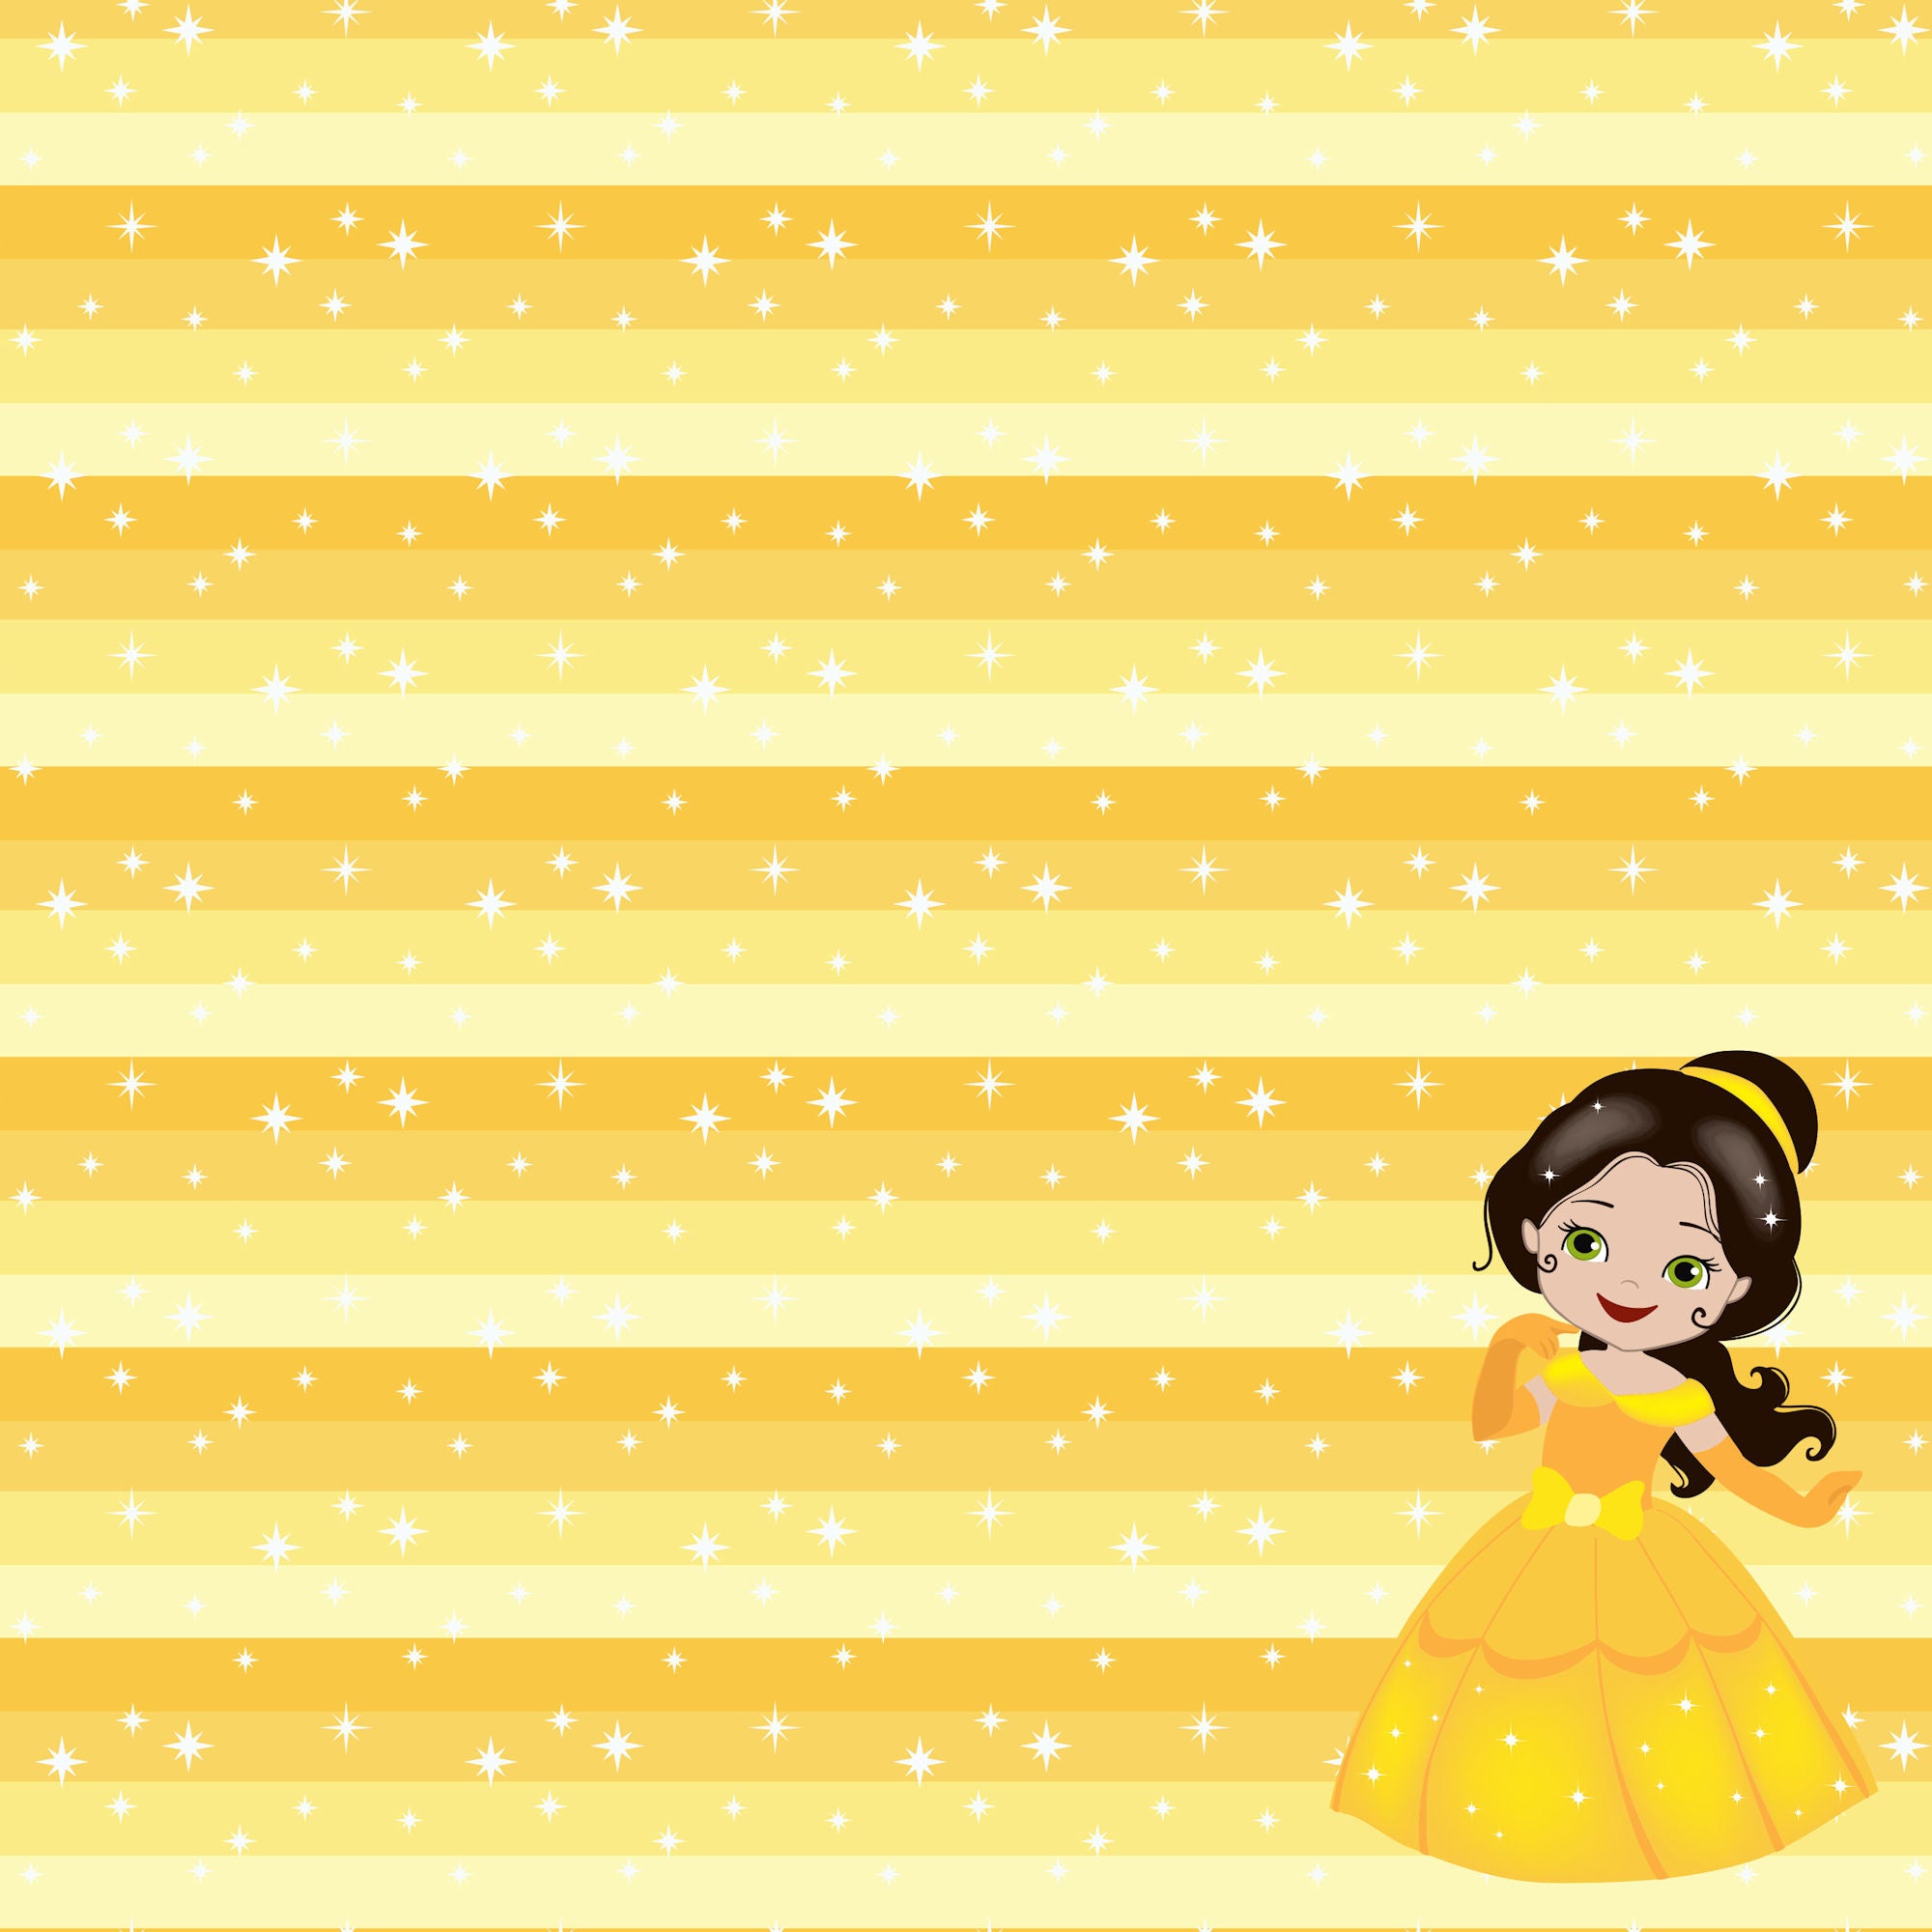 Inspired By Collection Yellow Princess 12 x 12 Double-Sided Scrapbook Paper by SSC Designs